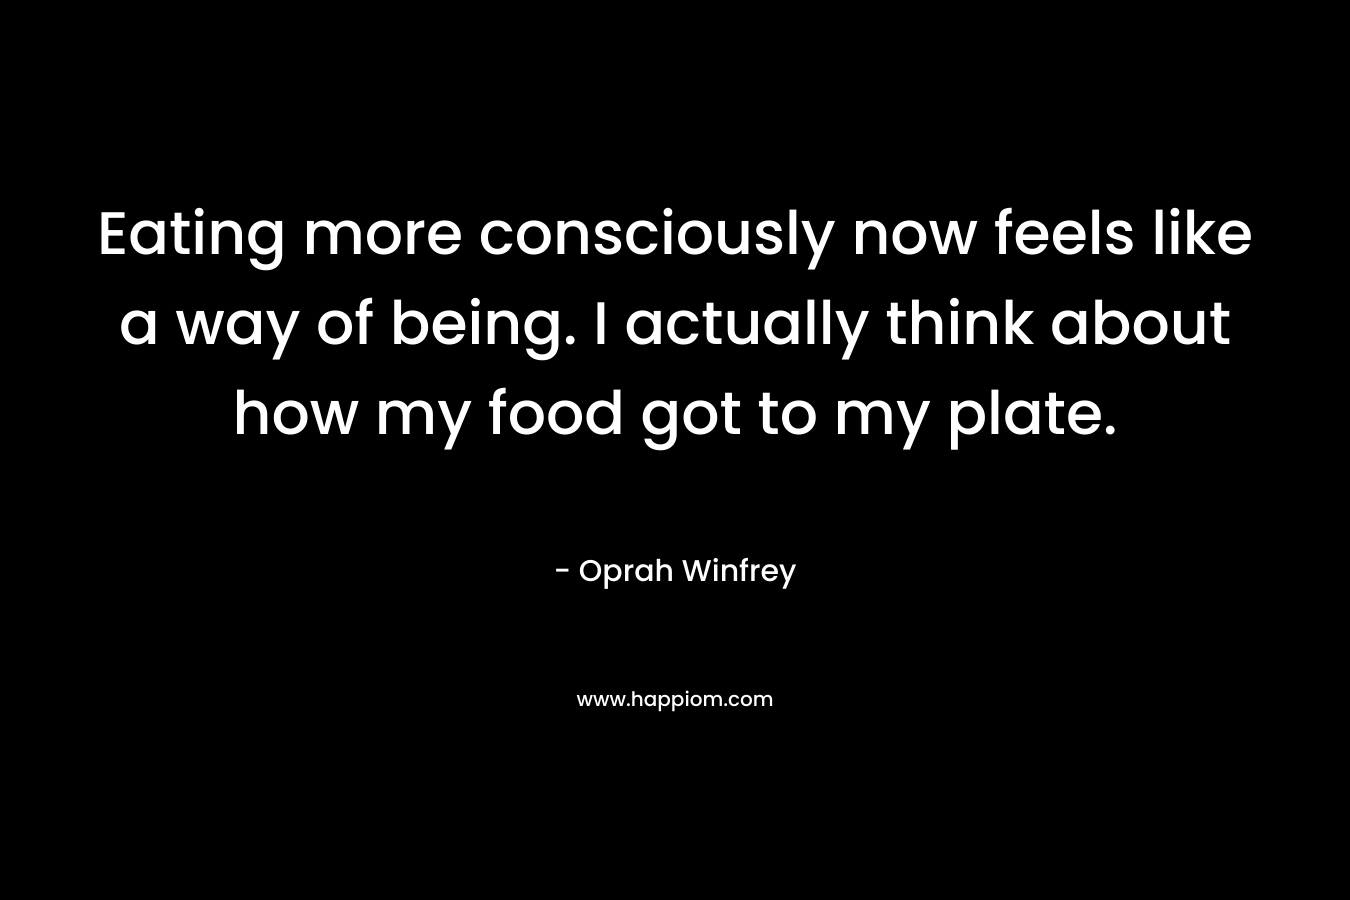 Eating more consciously now feels like a way of being. I actually think about how my food got to my plate.